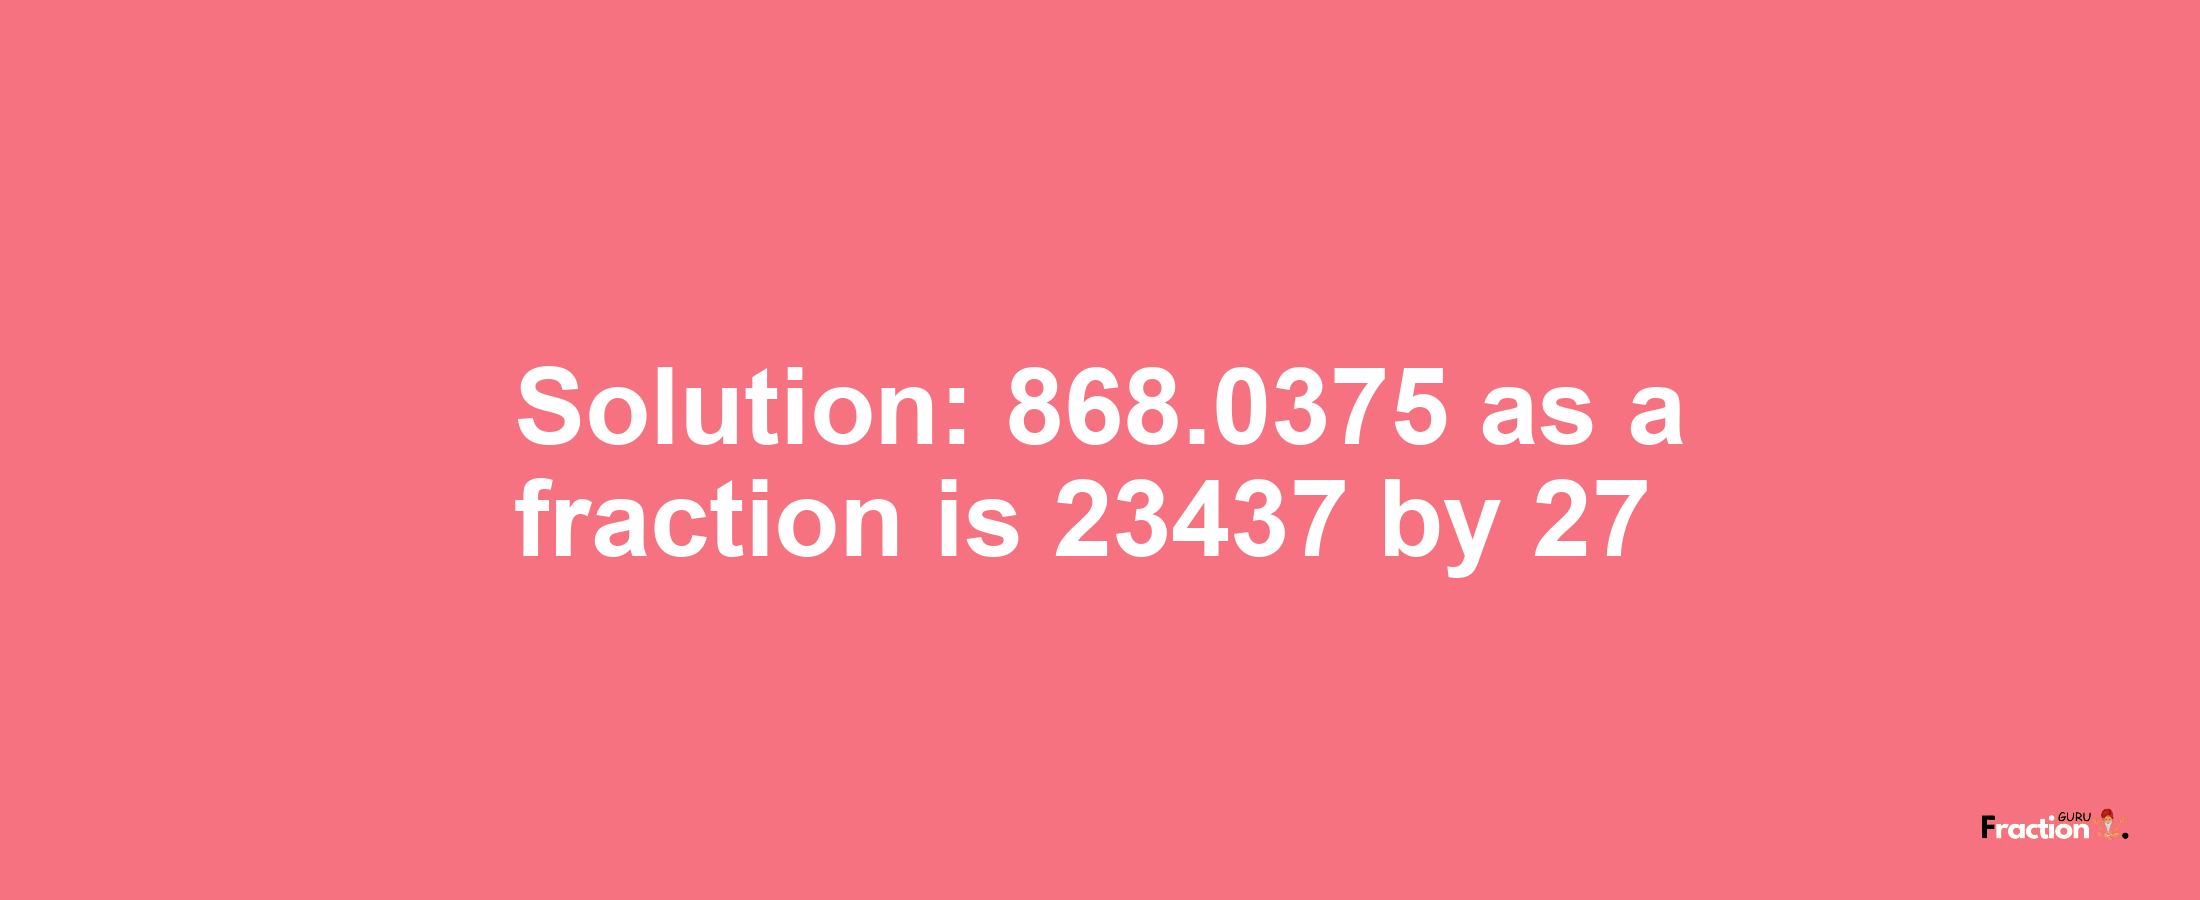 Solution:868.0375 as a fraction is 23437/27